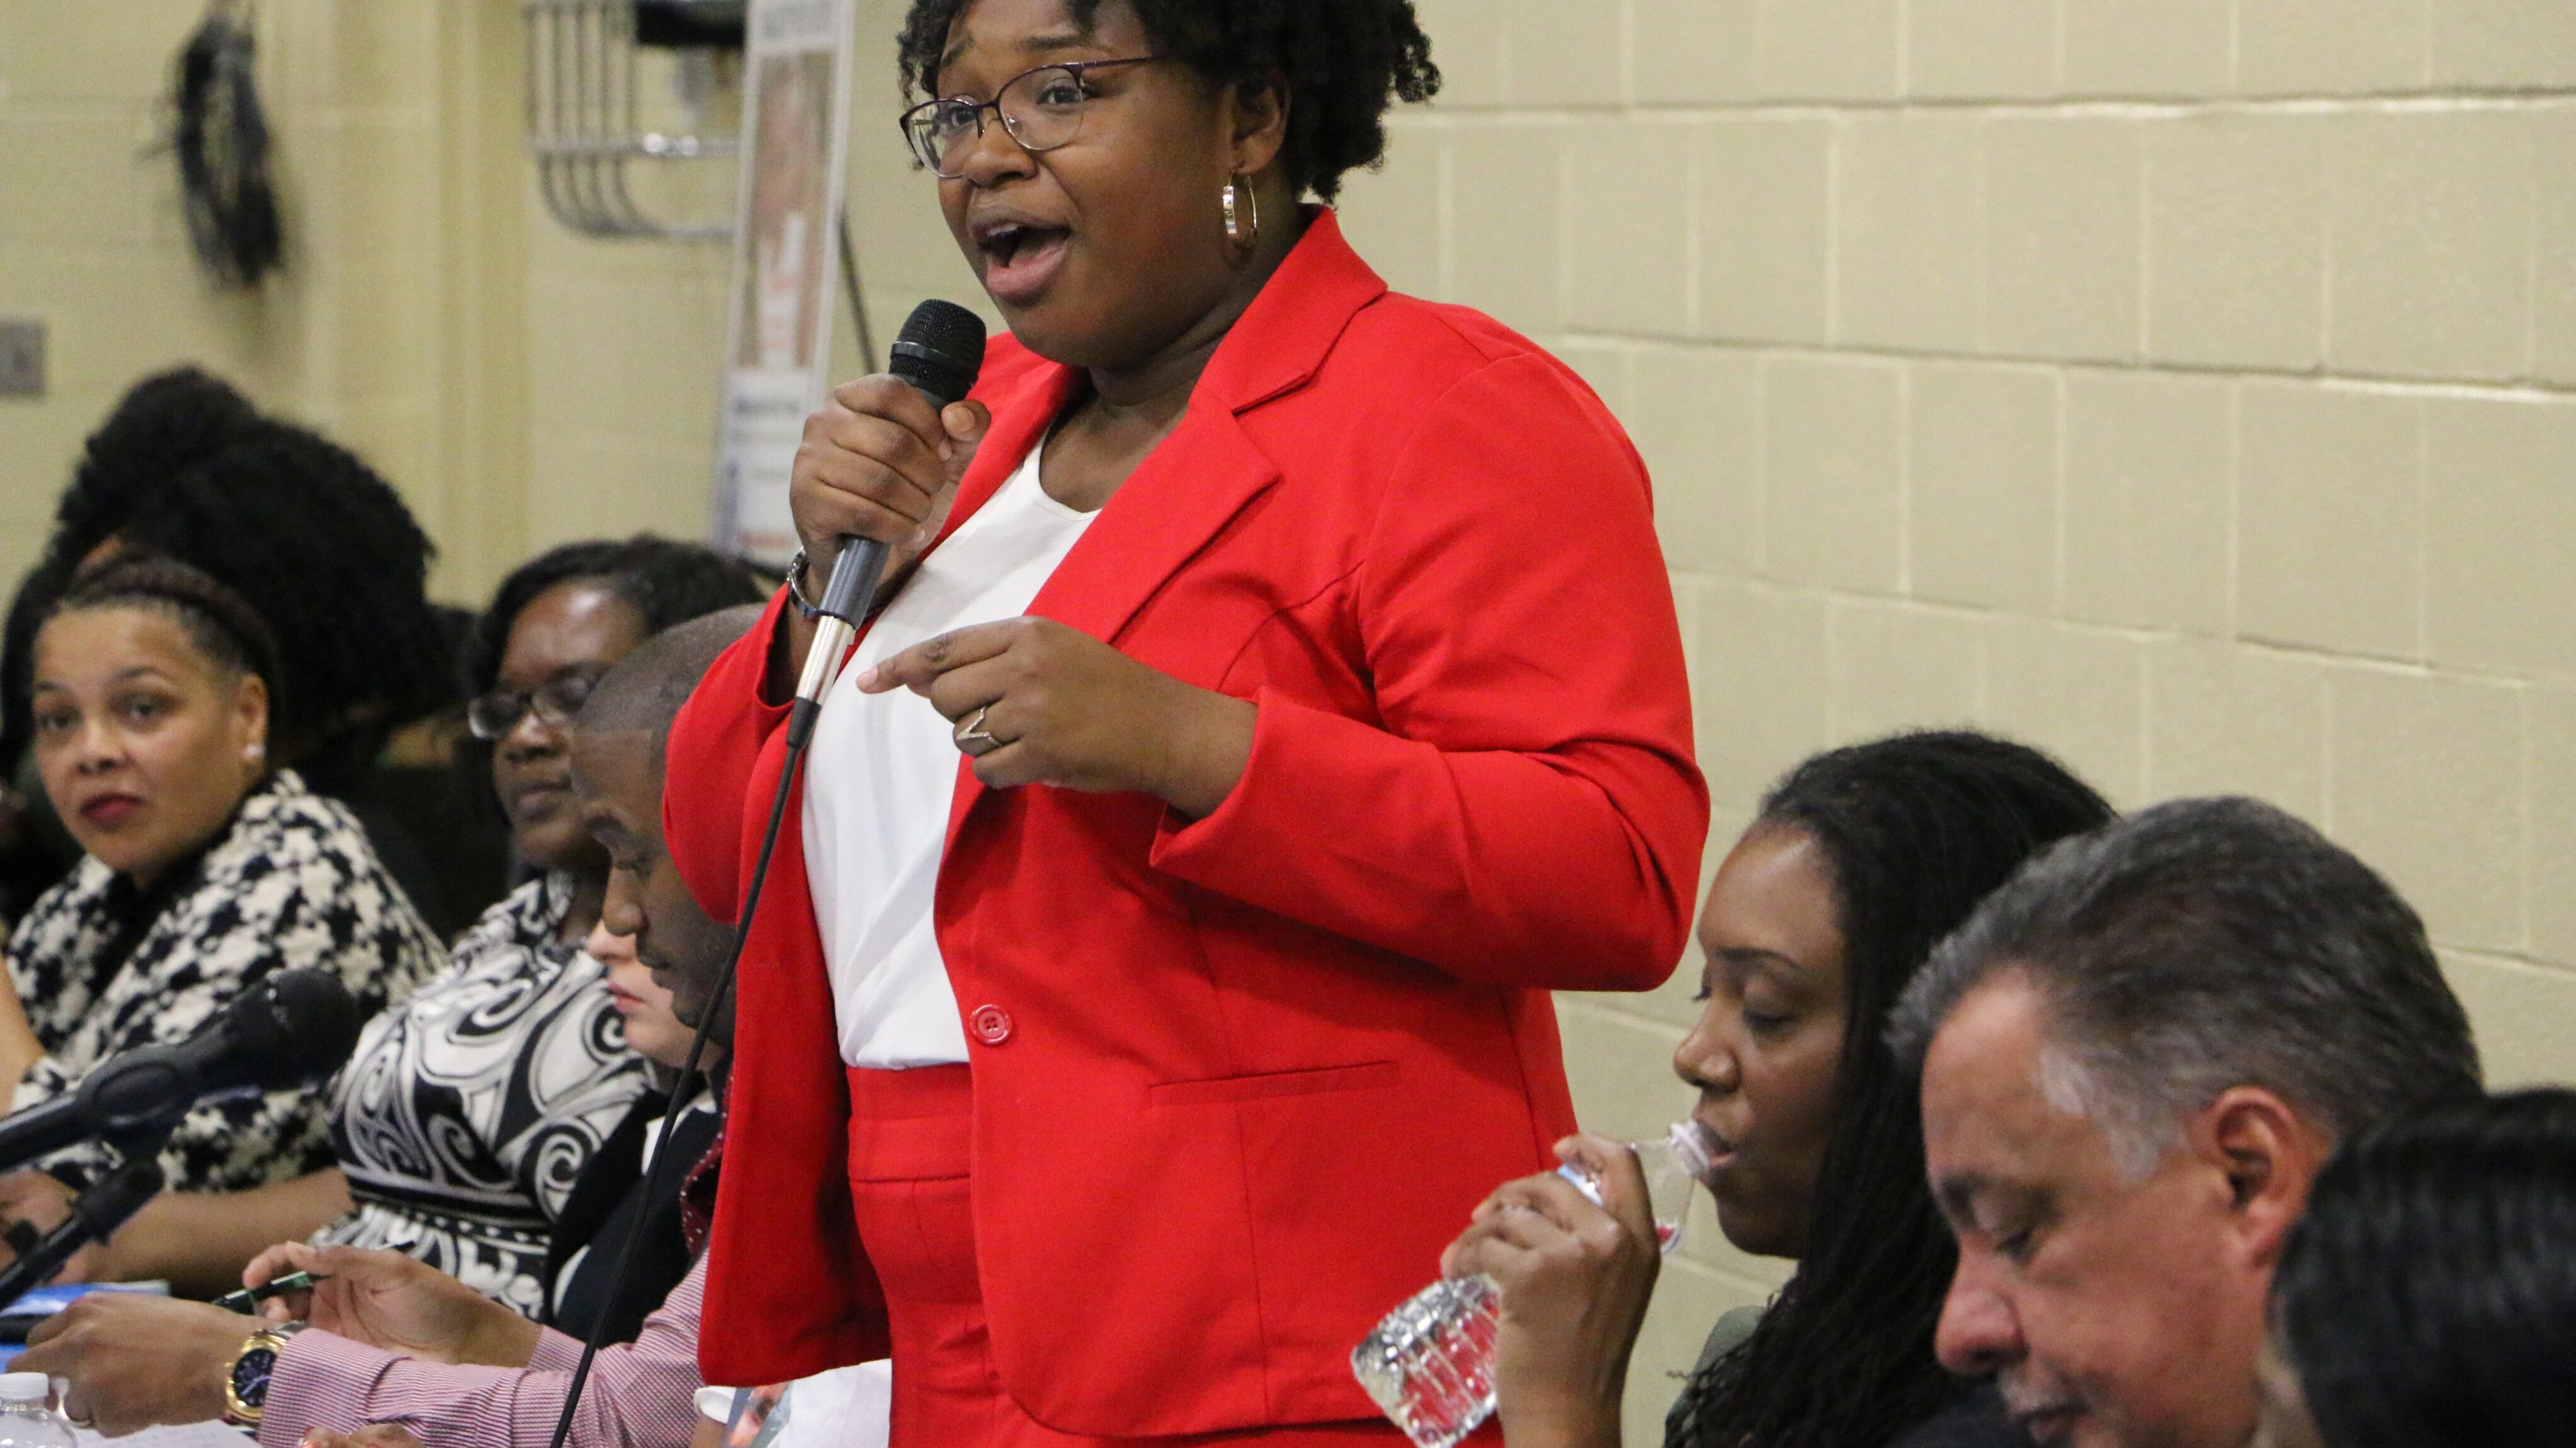 Newark Board of Education member A’Dorian Murray-Thomas. wearing a red suit, speaks while holding a microphone.